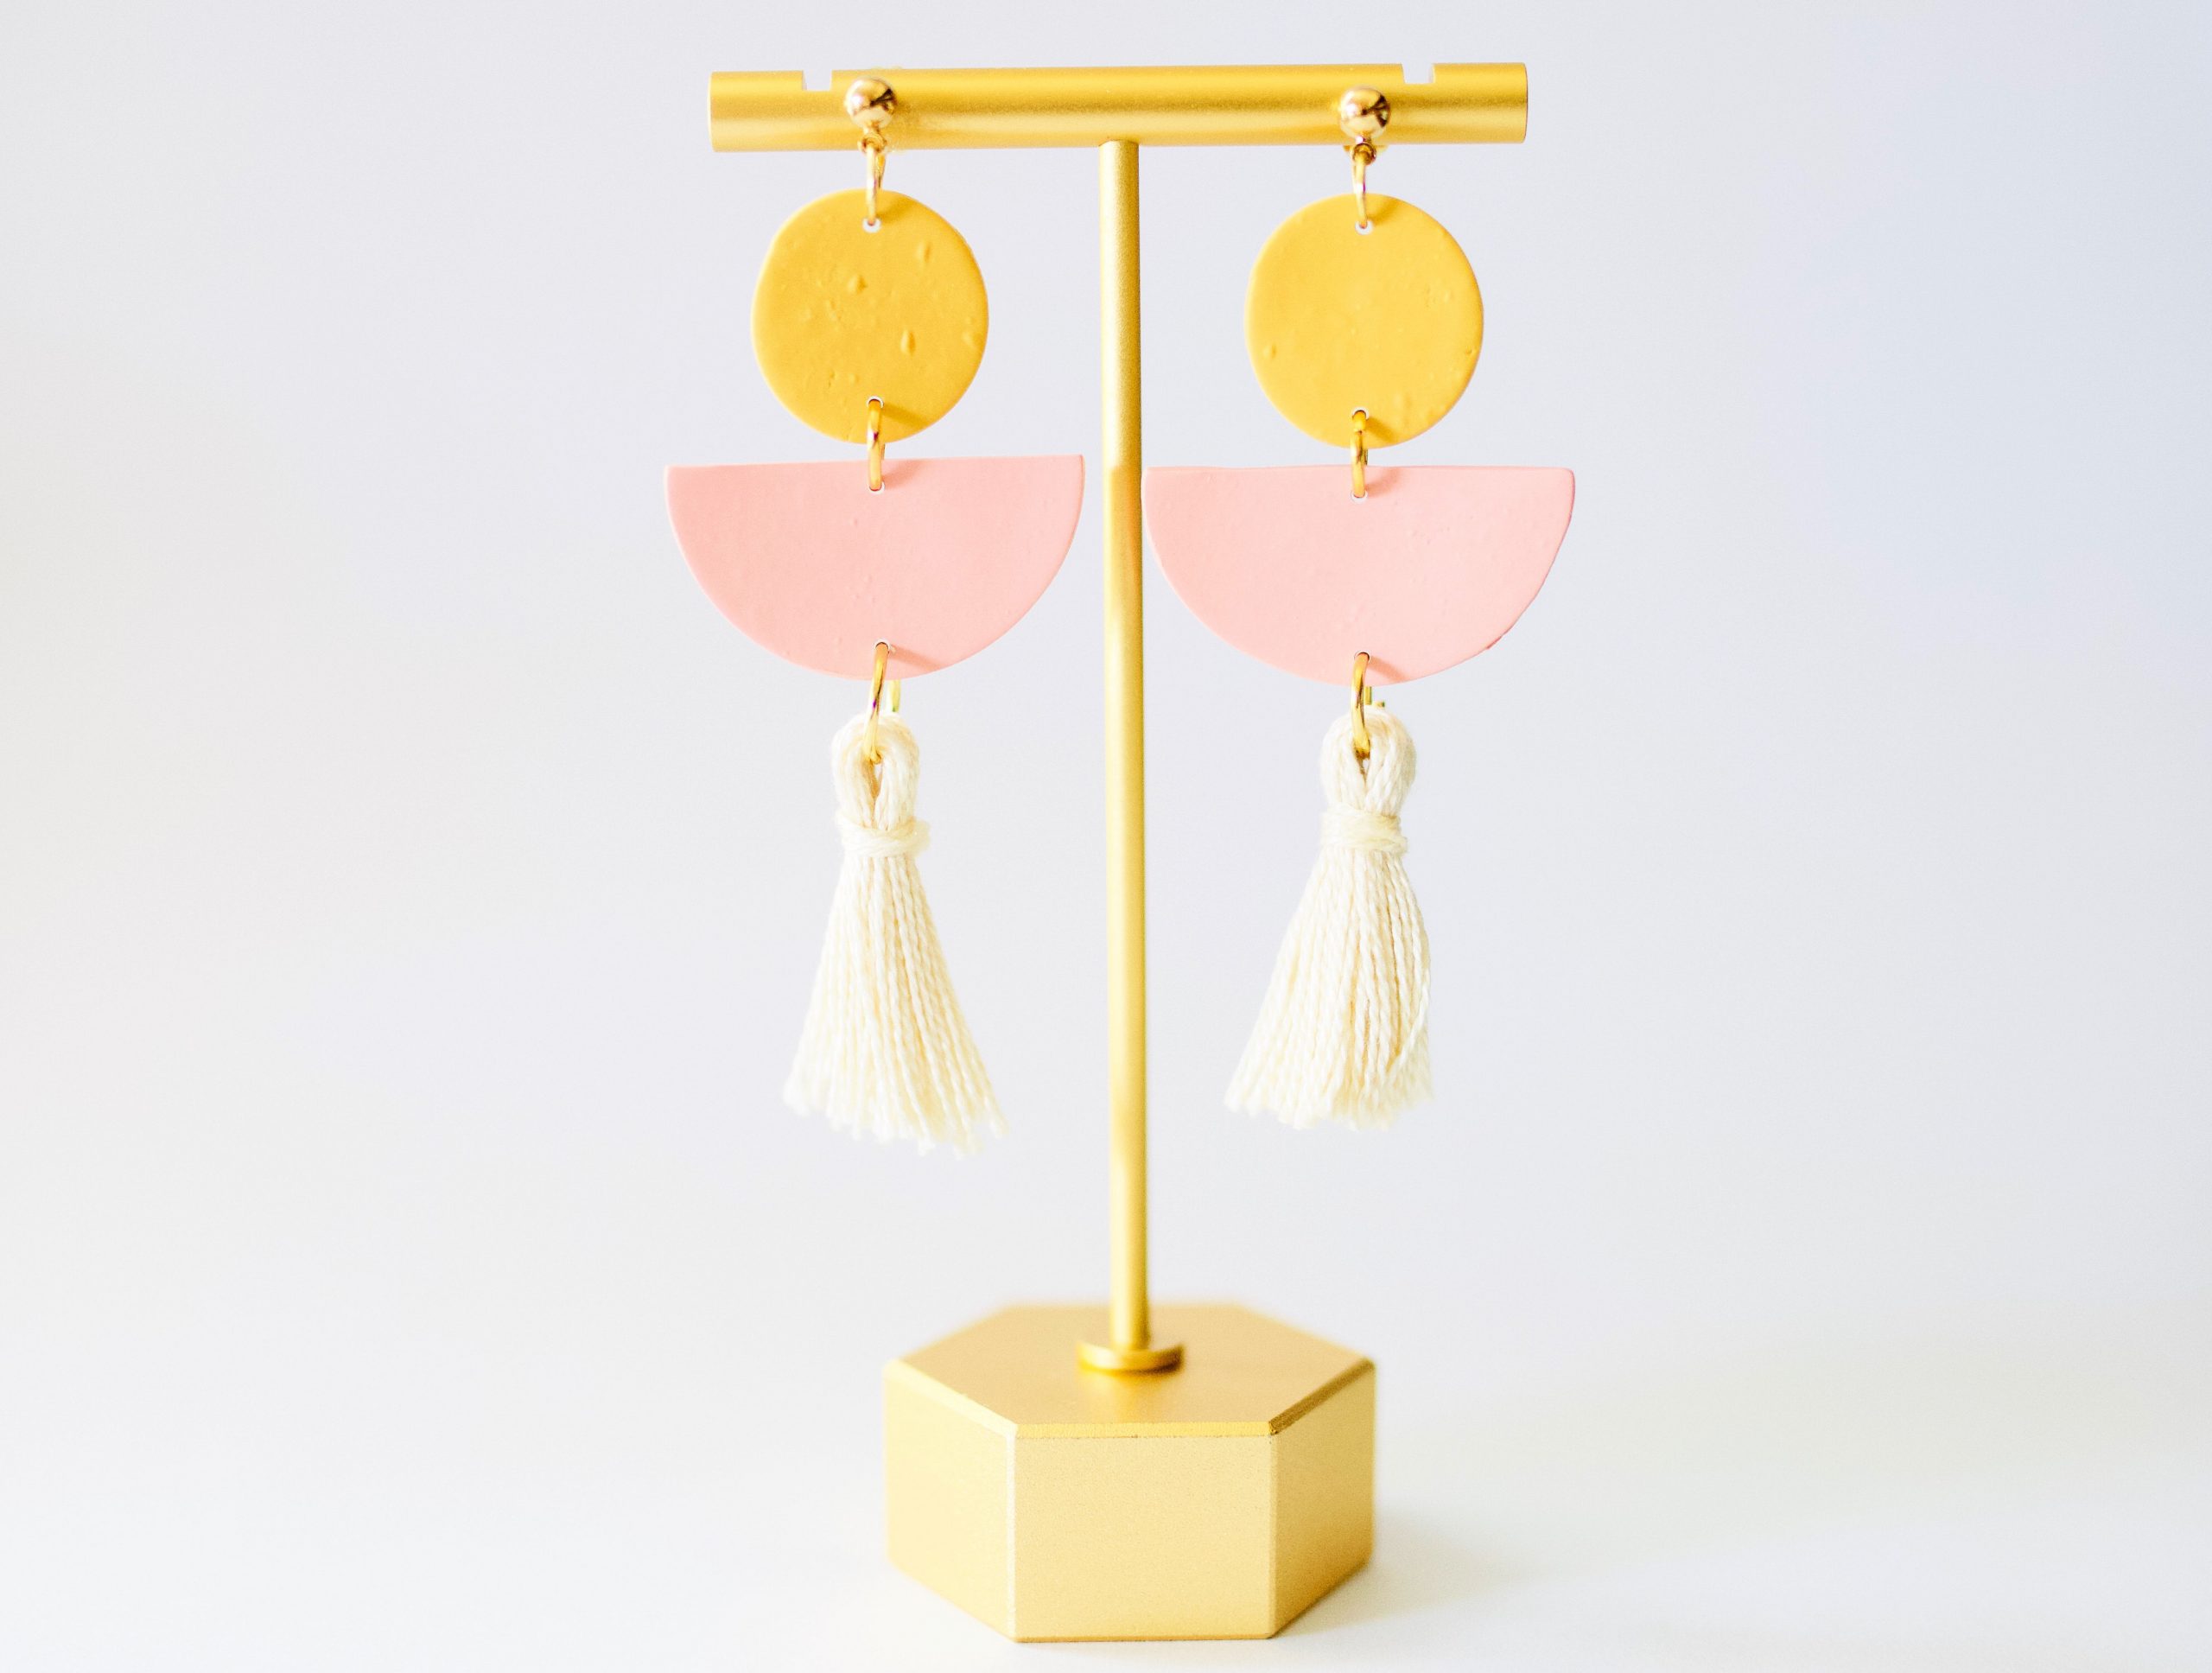 clay earrings made by grey + clay, perfect for Mother's Day